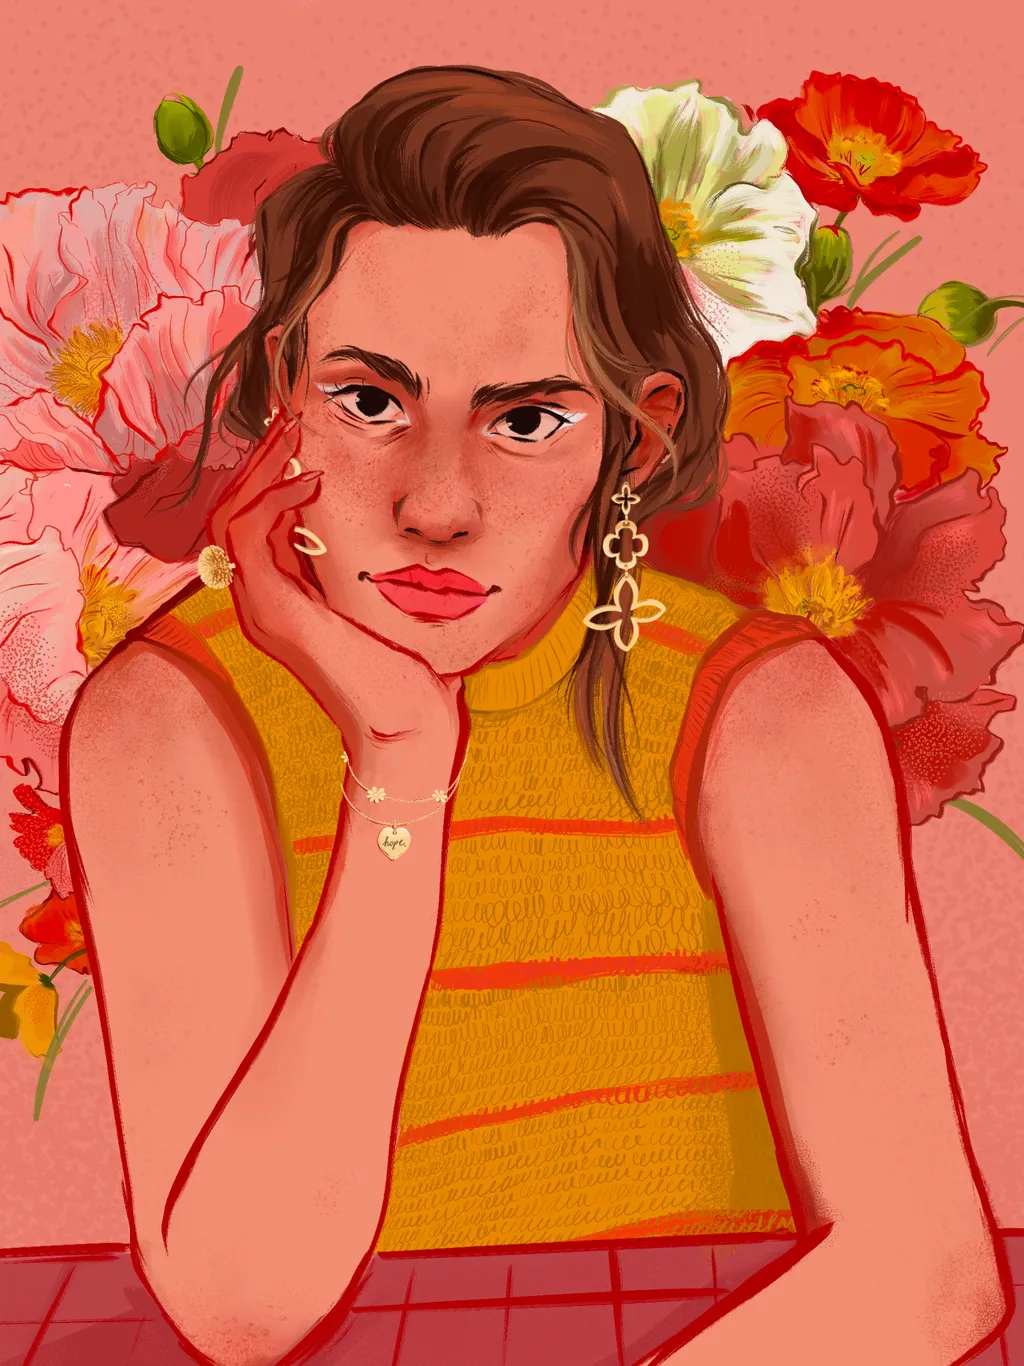 a digital, vividly-colored illustration depicting a woman leaning on the table, wearing a crocheted top and golden jewelry, with Icelandic poppies in the background